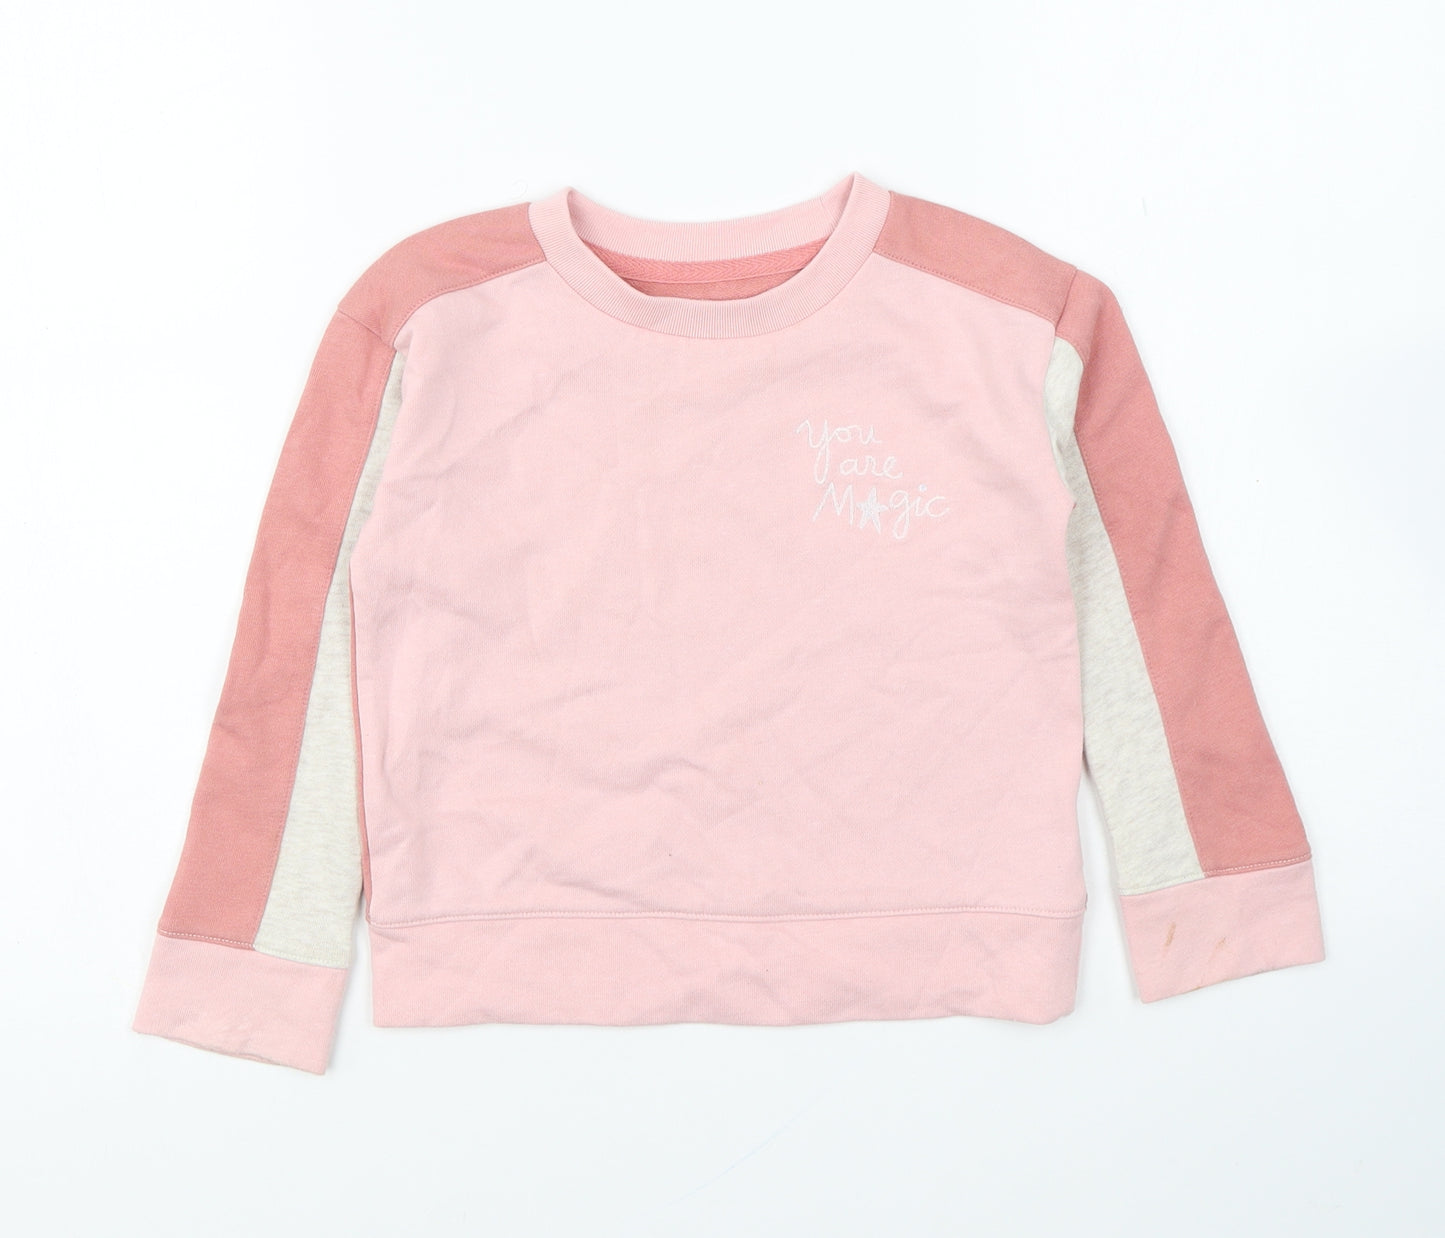 Gap Girls Pink Cotton Pullover Sweatshirt Size 4-5 Years Pullover - You Are Magic